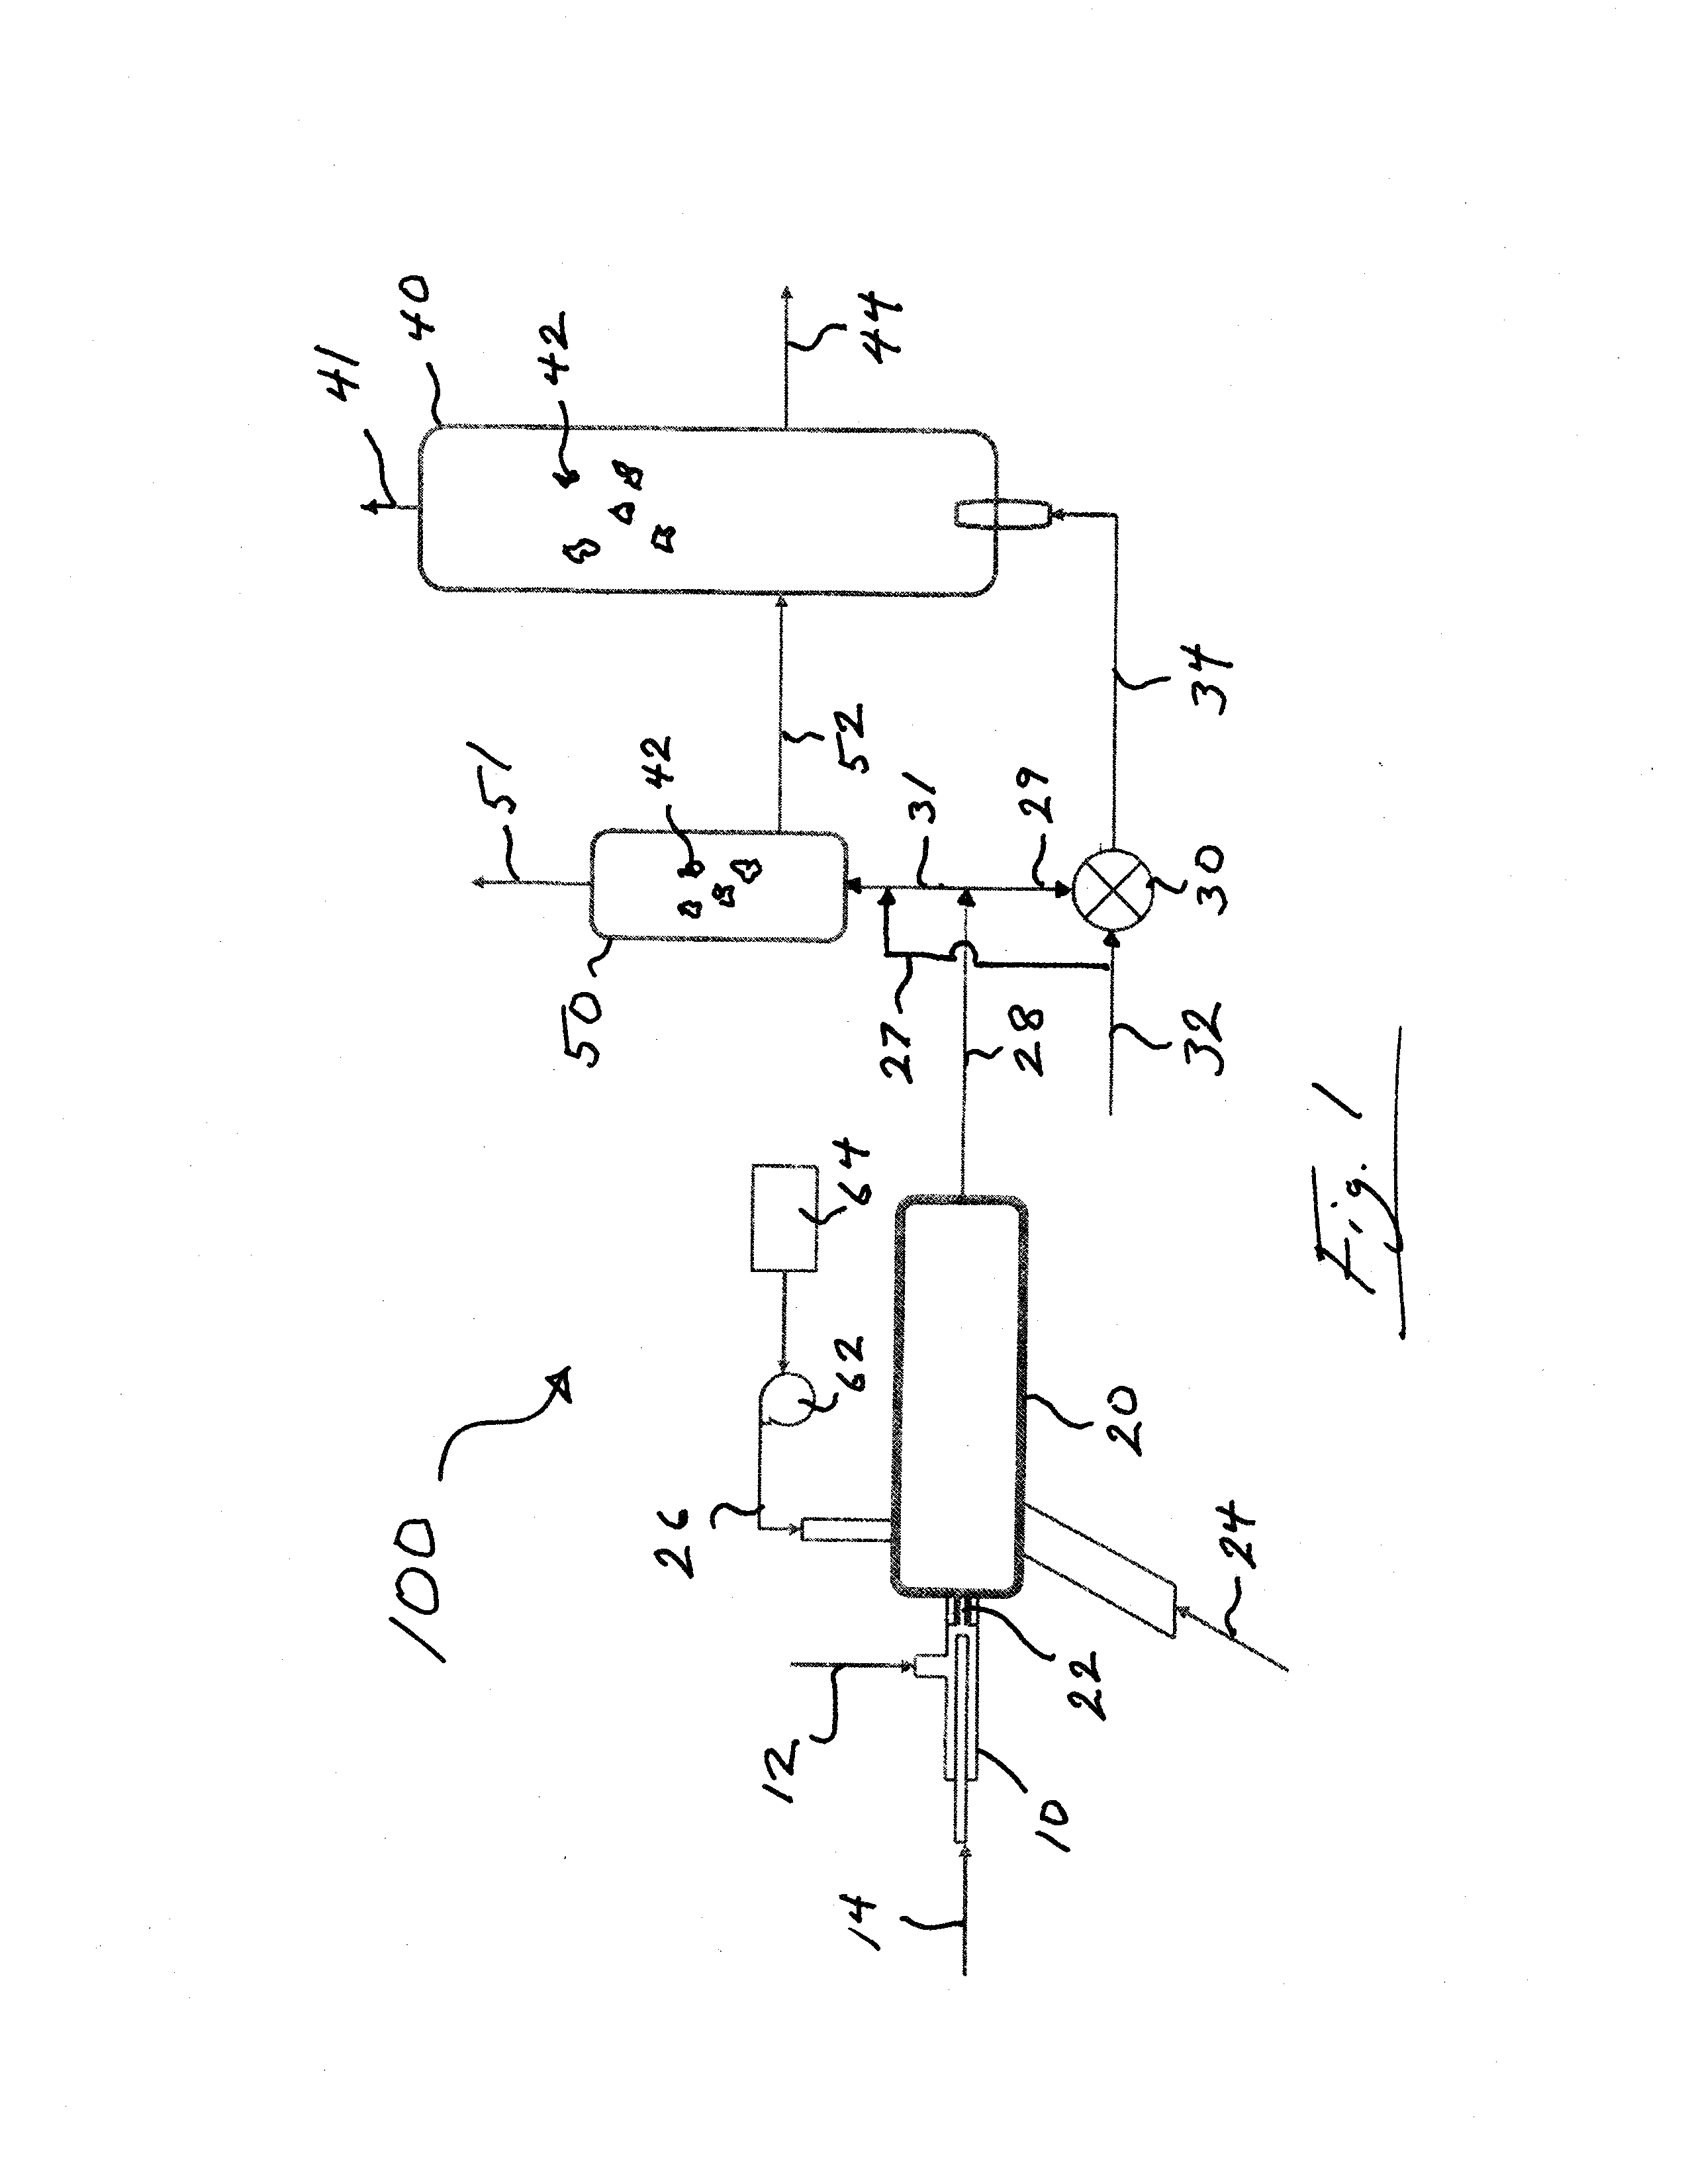 Sulfide generation process and system for syngas fermentation